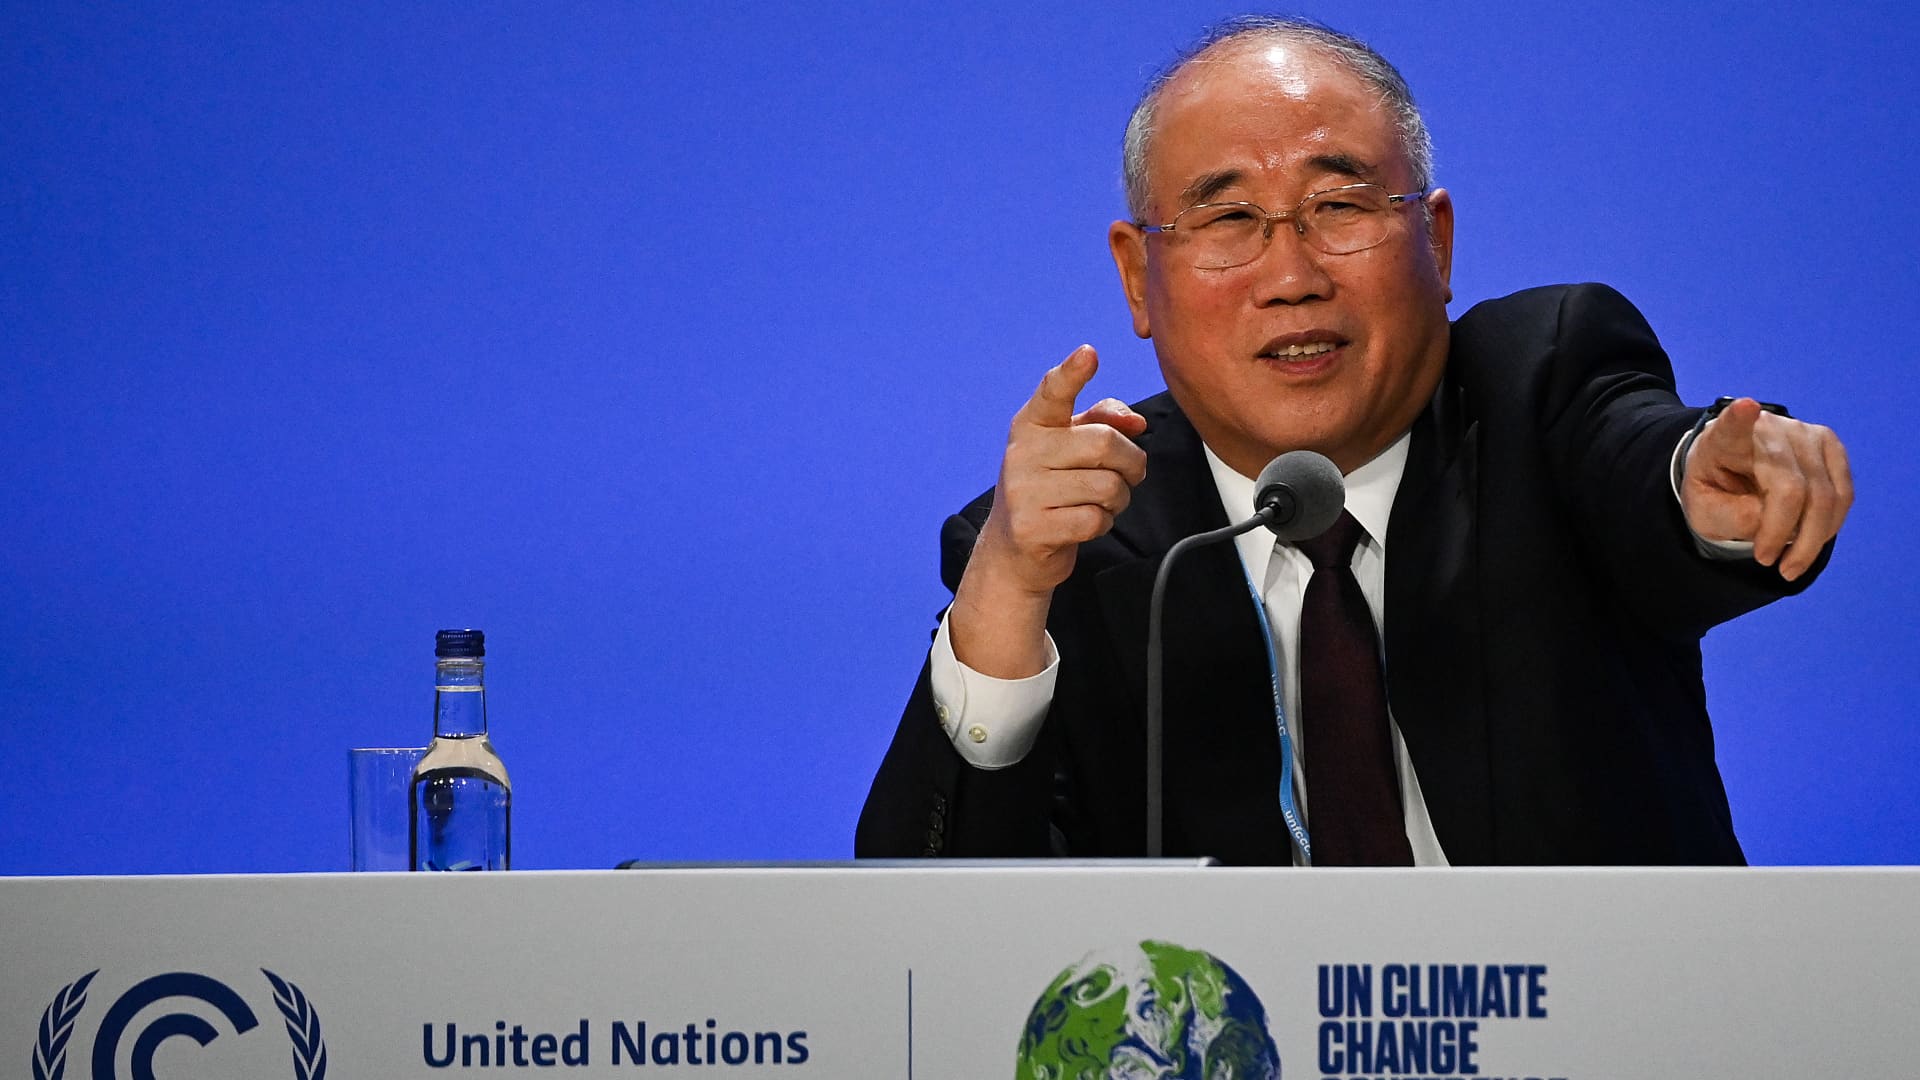 China's special climate envoy, Xie Zhenhua speaks during a joint China and U.S. statement on a declaration enhancing climate action in the 2020's on day eleven of the COP26 climate change conference at the SEC on November 10, 2021 in Glasgow, Scotland.